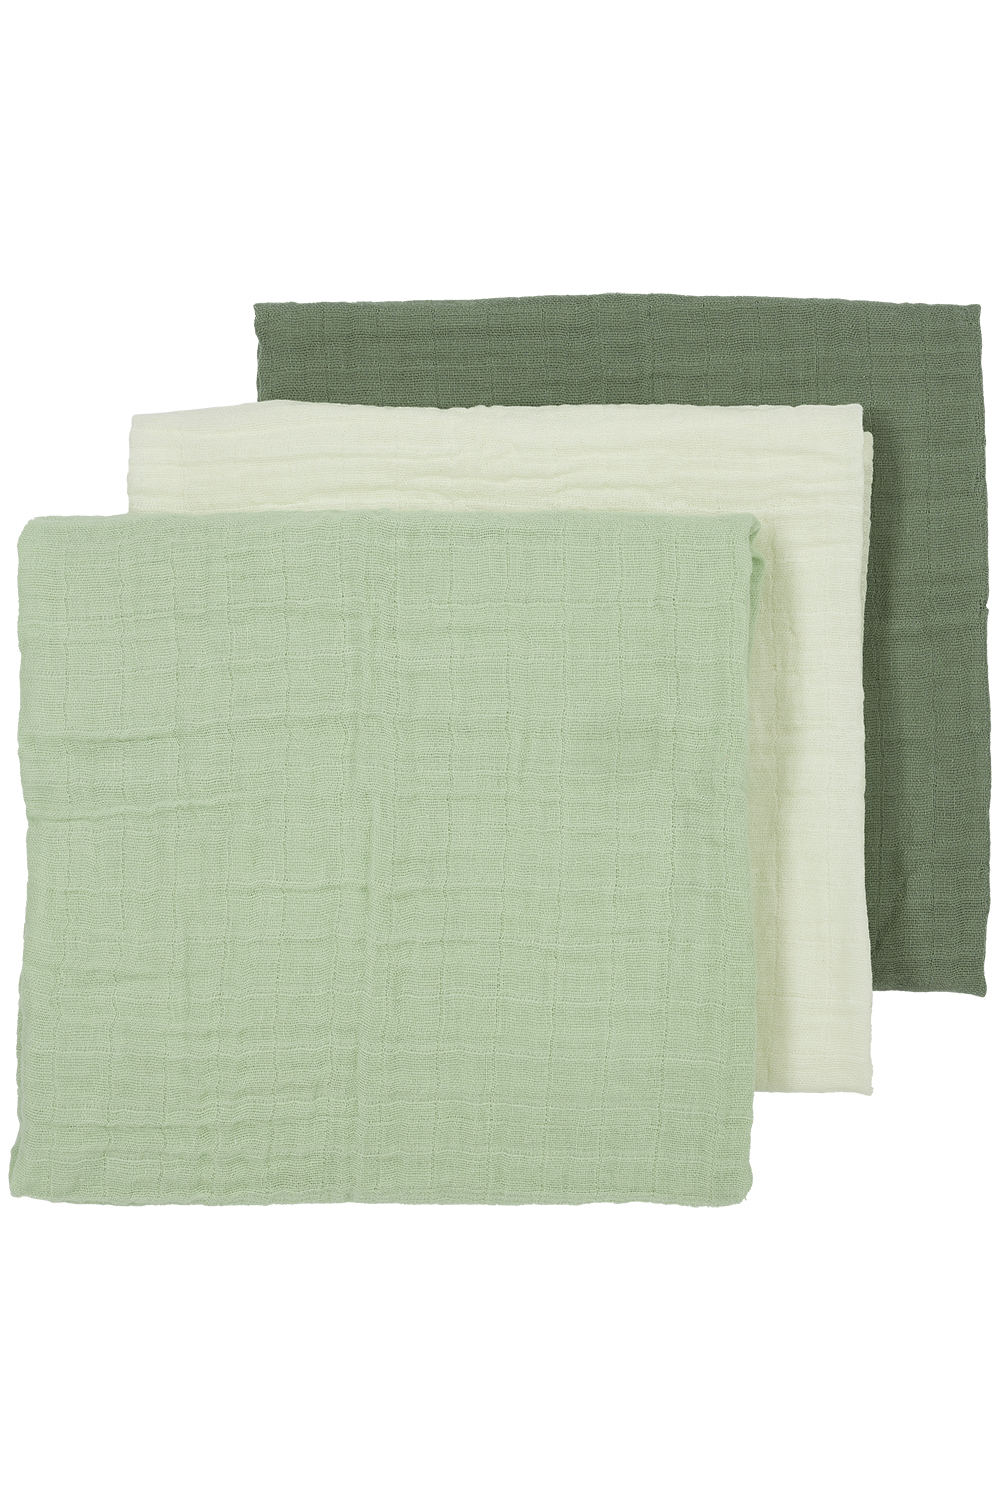 Pre-washed muslin squares 3-pack Uni - offwhite/soft green/forest green - 70x70cm